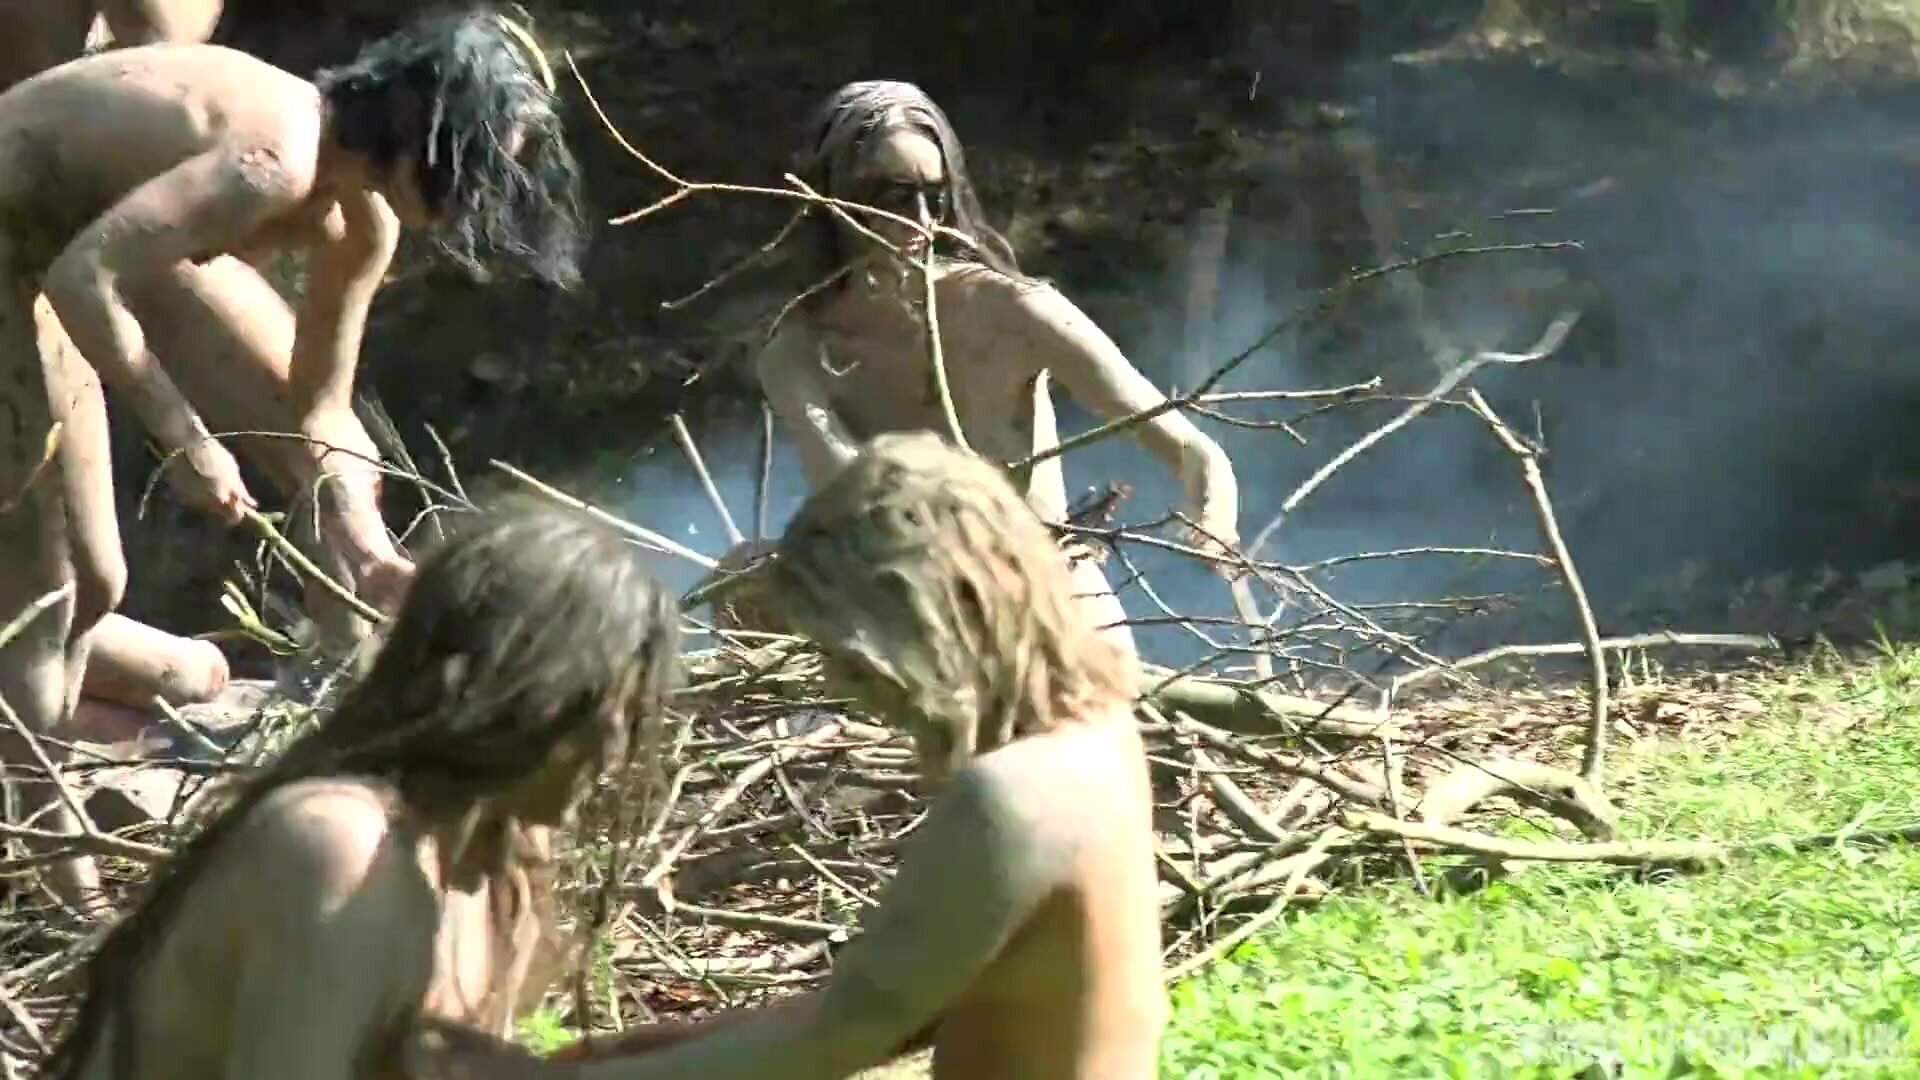 Horror Porn: The Amazons